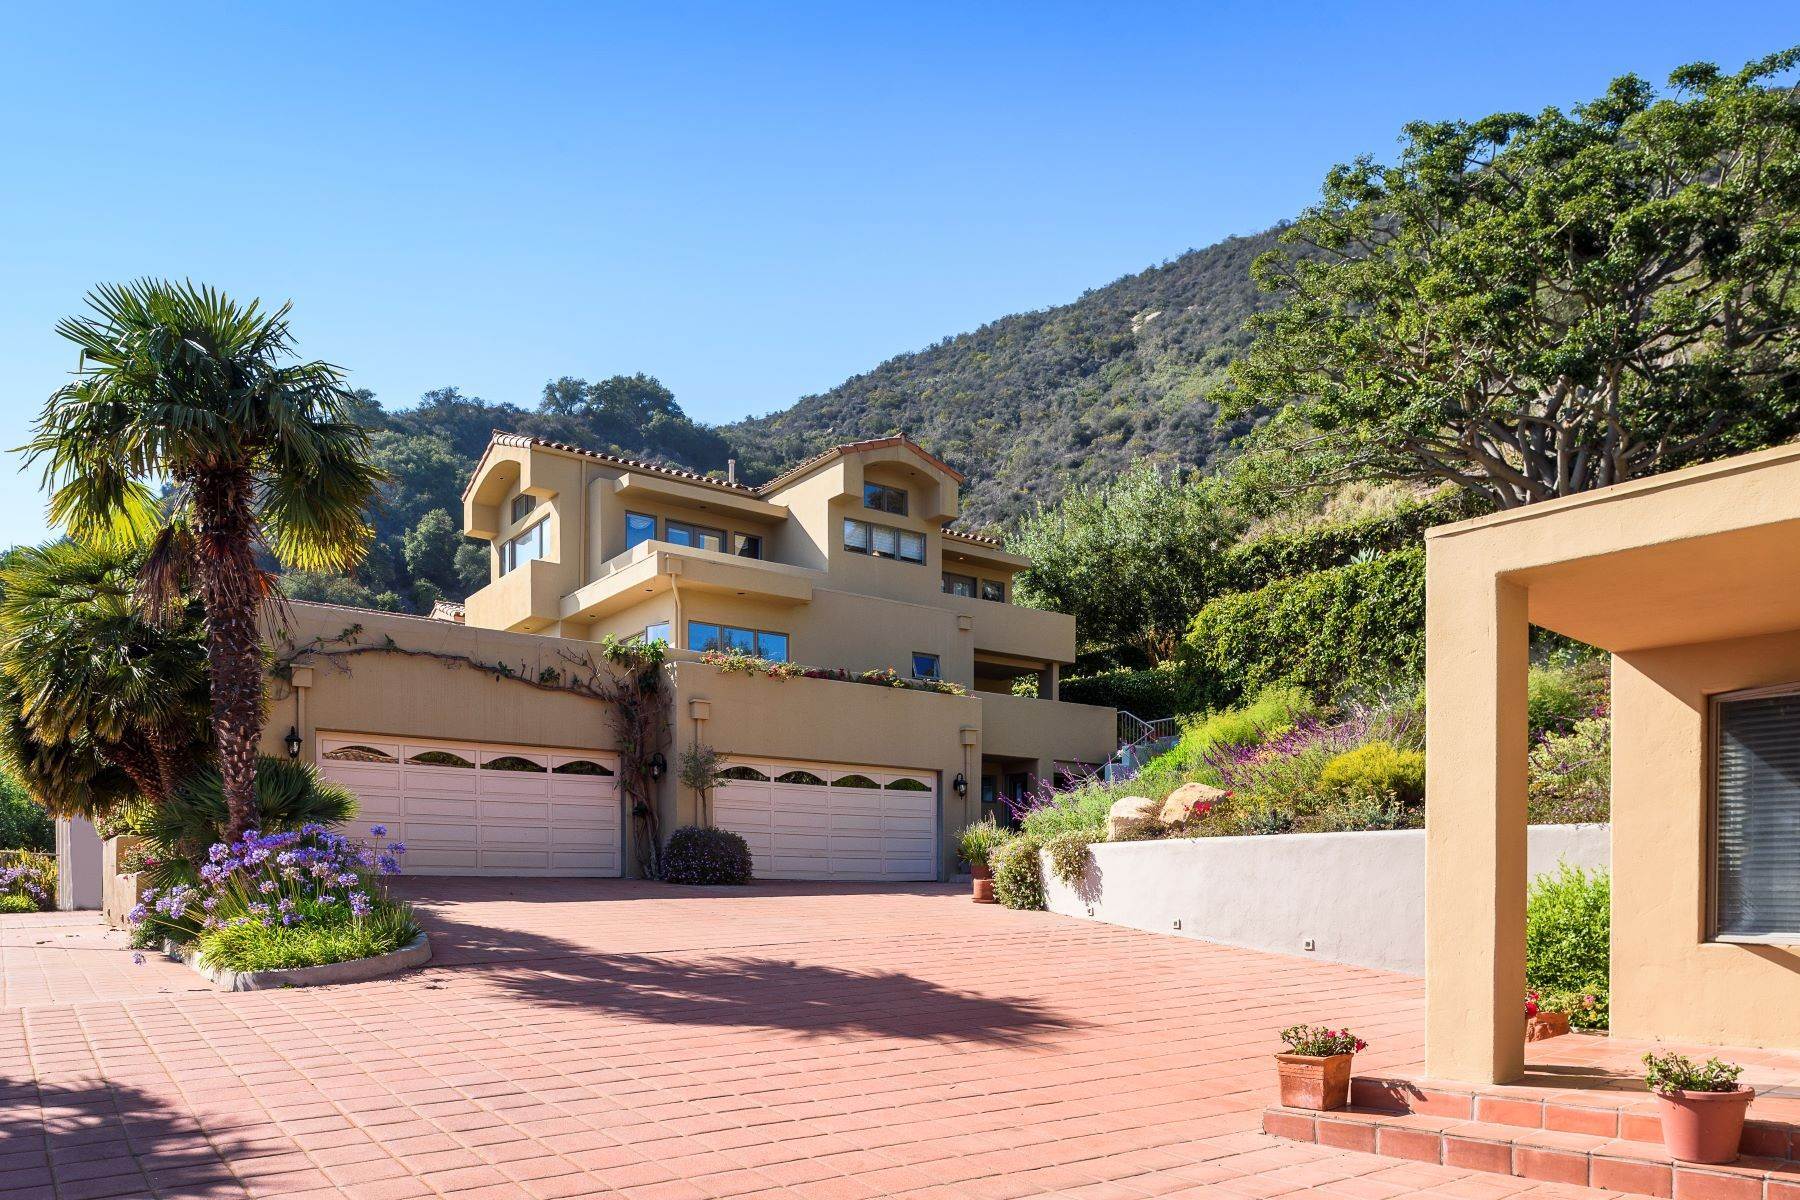 39. Single Family Homes for Sale at Secluded Hilltop Ocean View Oasis 1984 Arriba Street Carpinteria, California 93013 United States